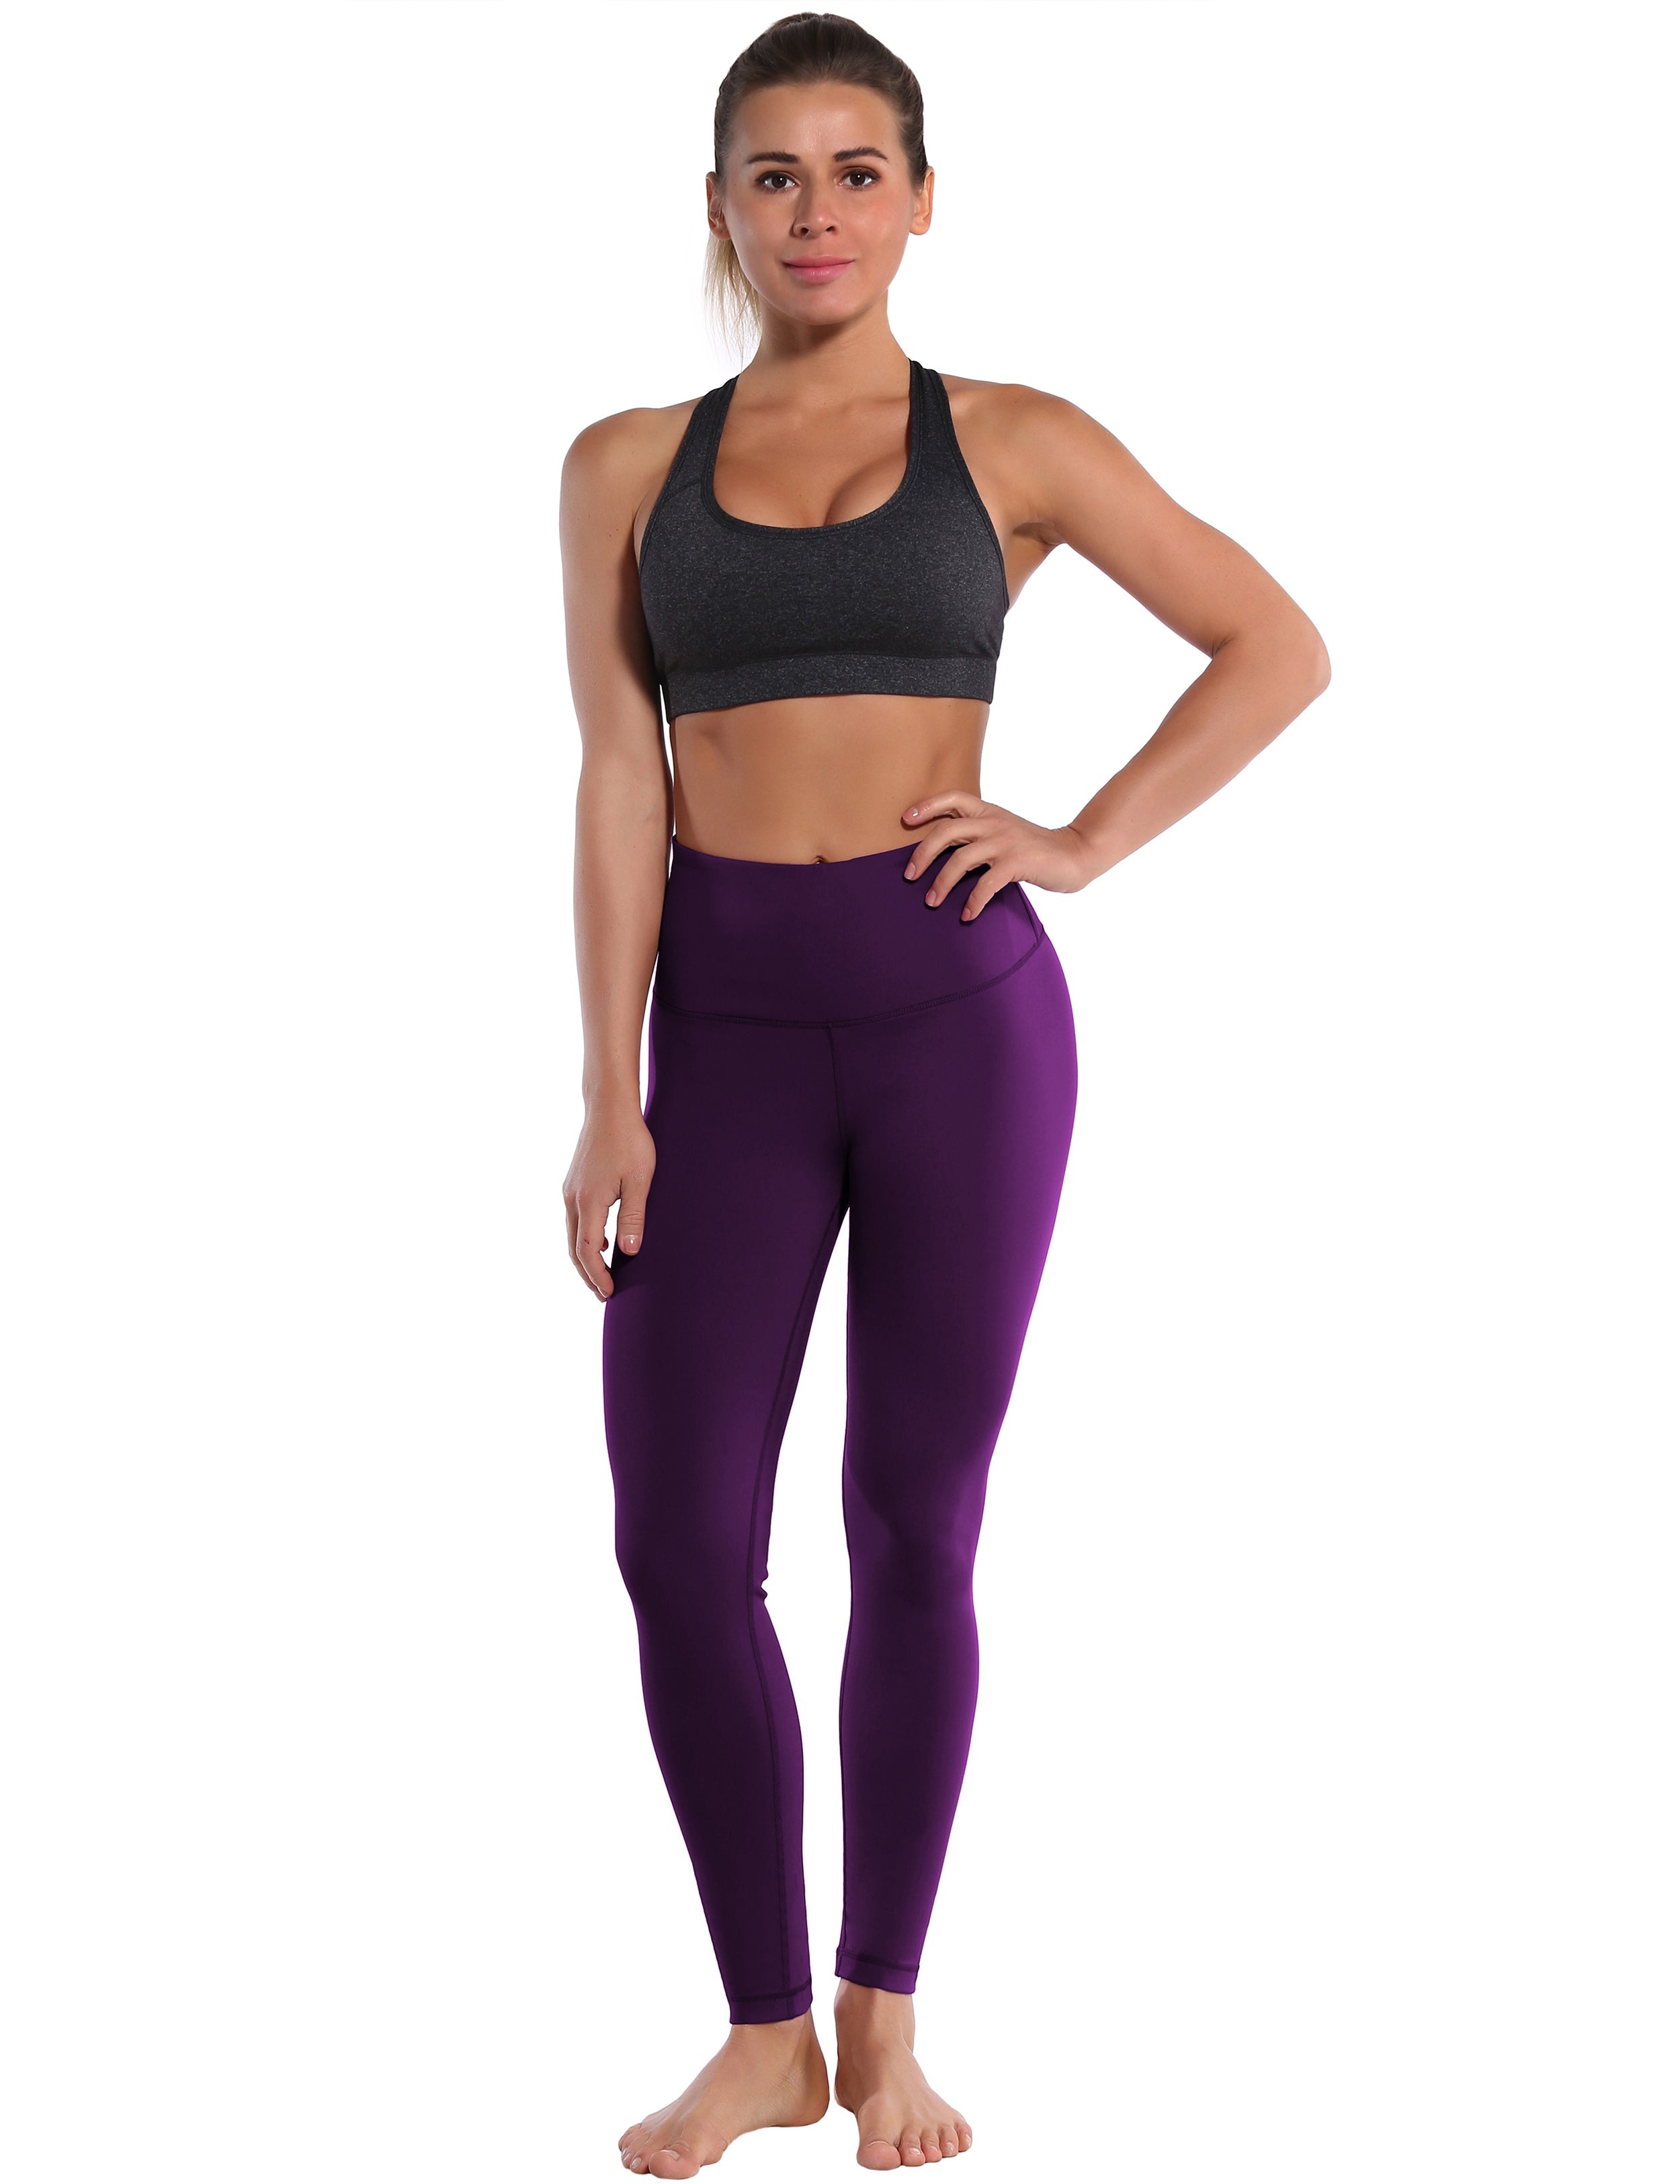 High Waist Golf Pants plum 75%Nylon/25%Spandex Fabric doesn't attract lint easily 4-way stretch No see-through Moisture-wicking Tummy control Inner pocket Four lengths